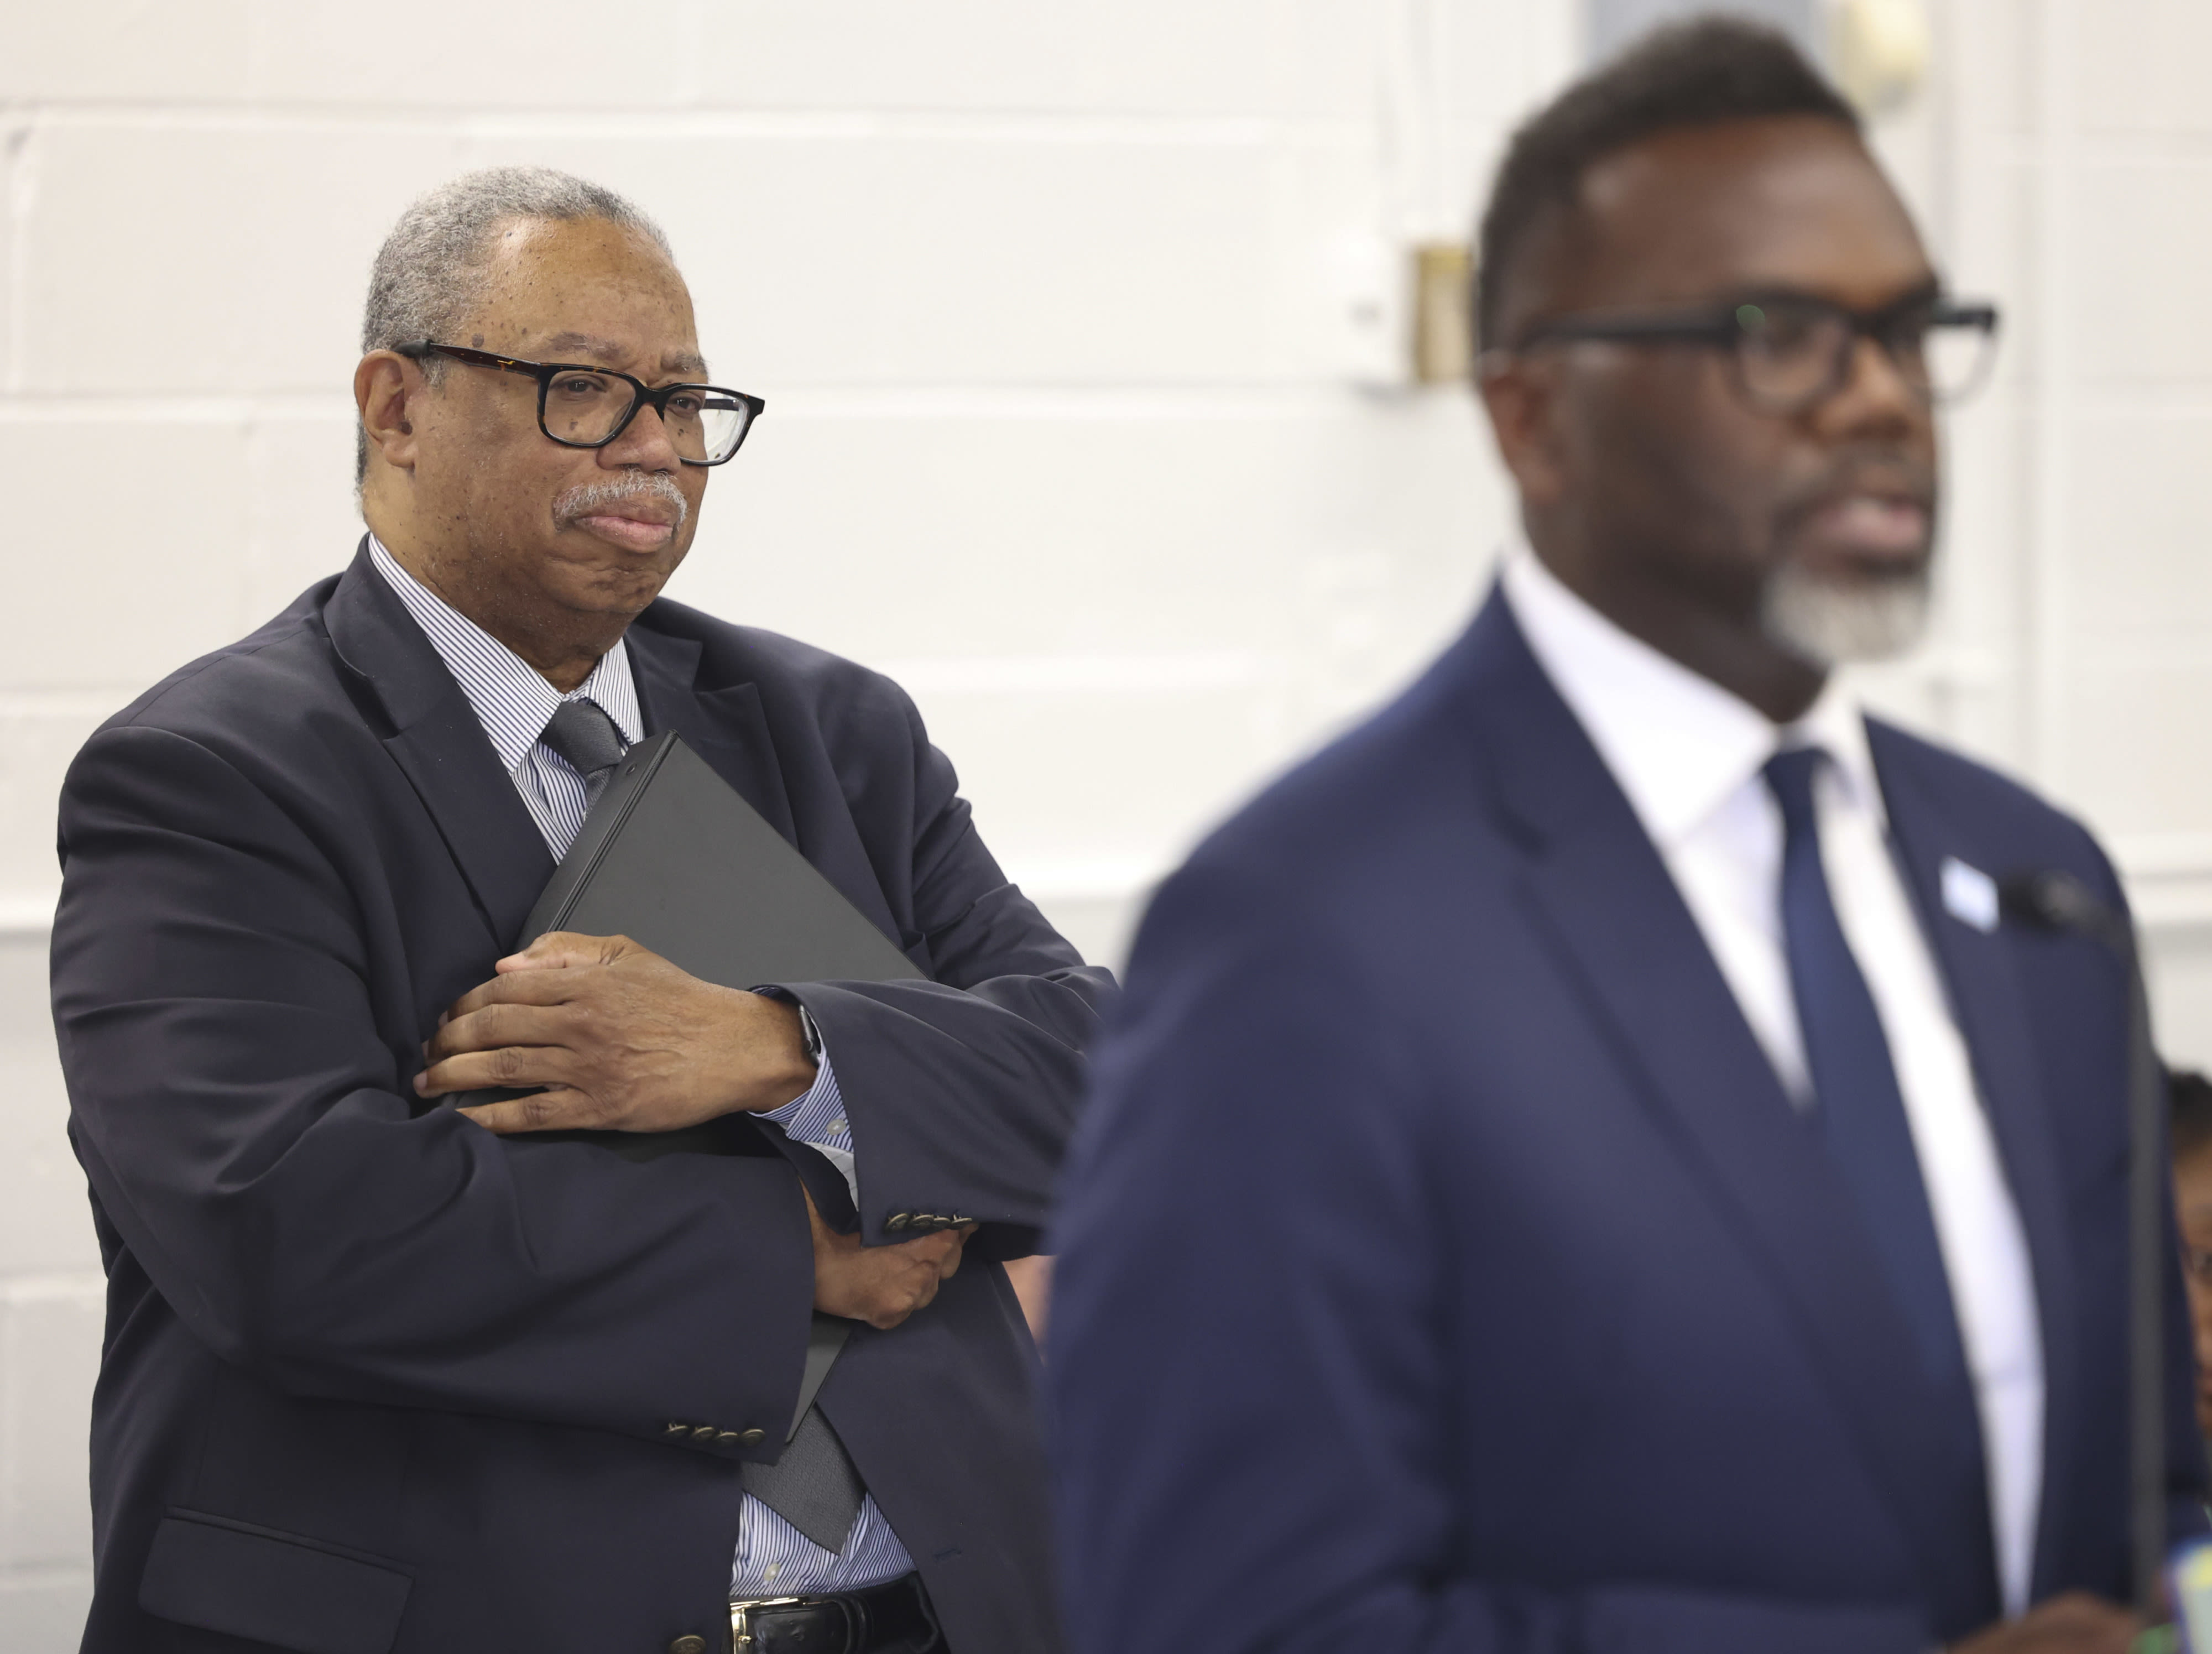 Fire CTA President Dorval Carter, a new City Council resolution says